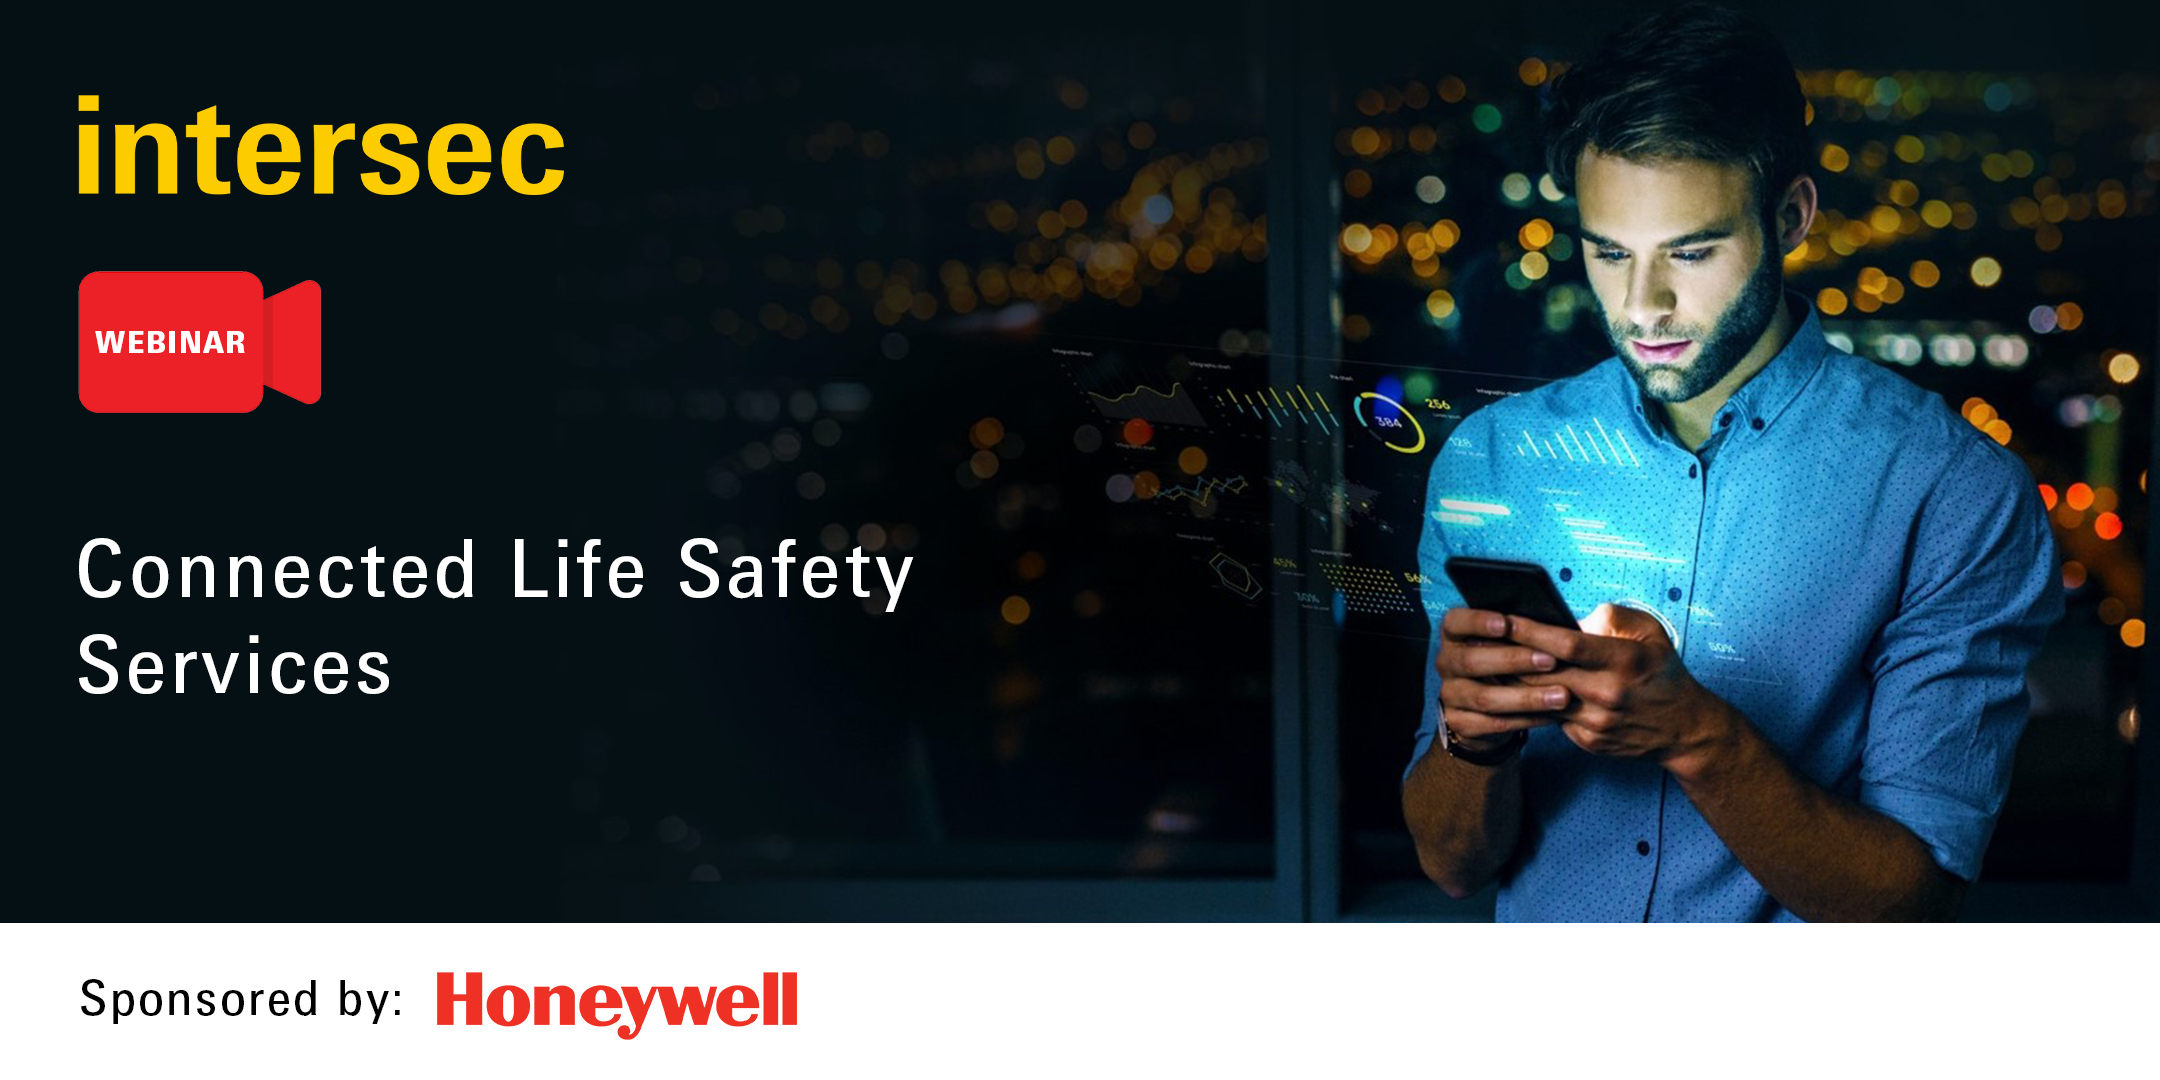 Connected Life Safety Services by Honeywell